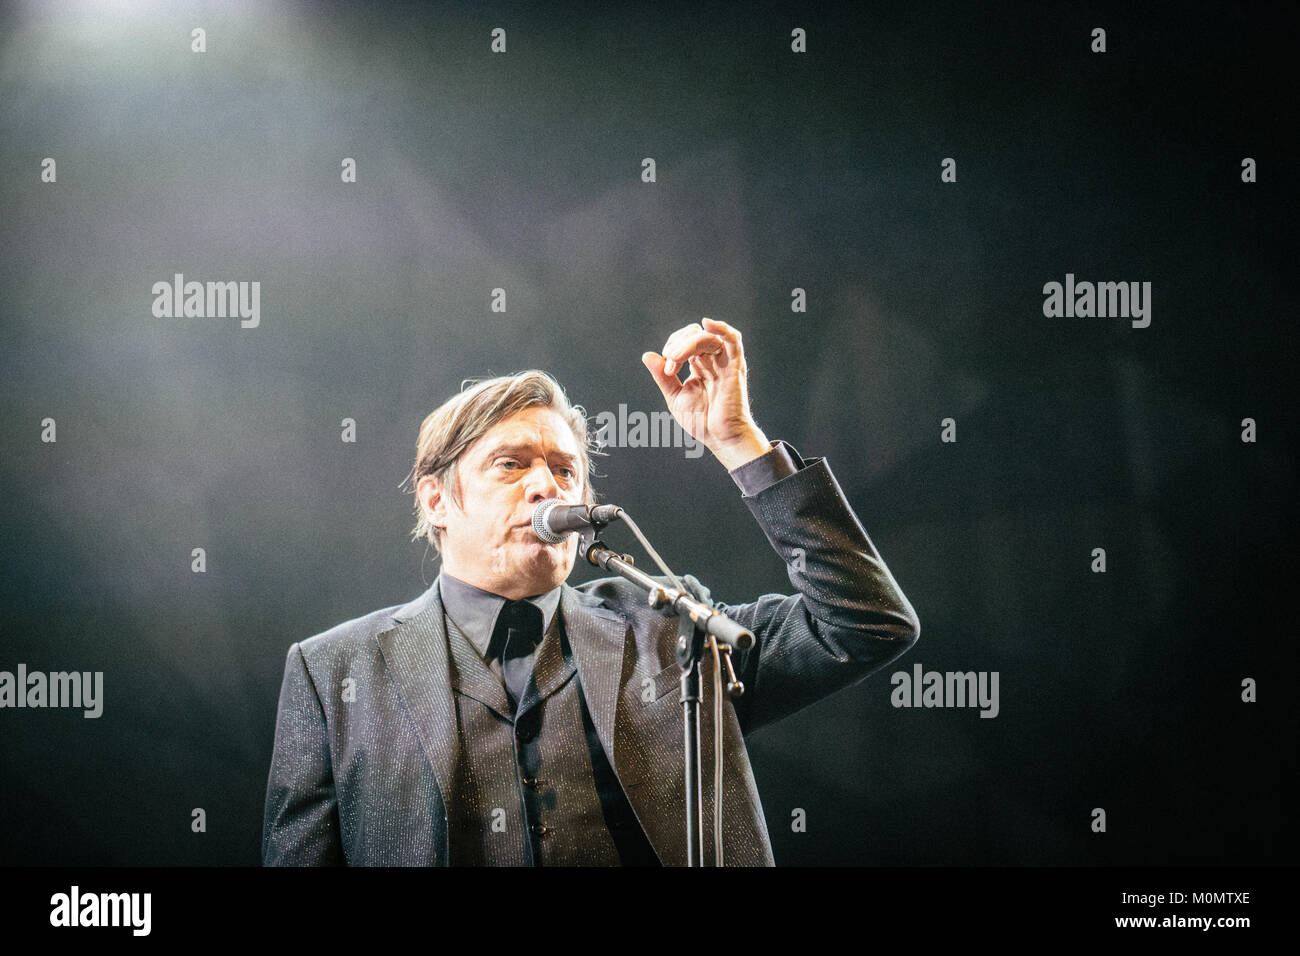 The German industrial band Einstürzende Neubauten performs a live concert at the Danish music festival Roskilde Festival 2015. Here singer and artist Blixa Bargeld is pictured live on stage. Denmark, 03/07 2015. Stock Photo